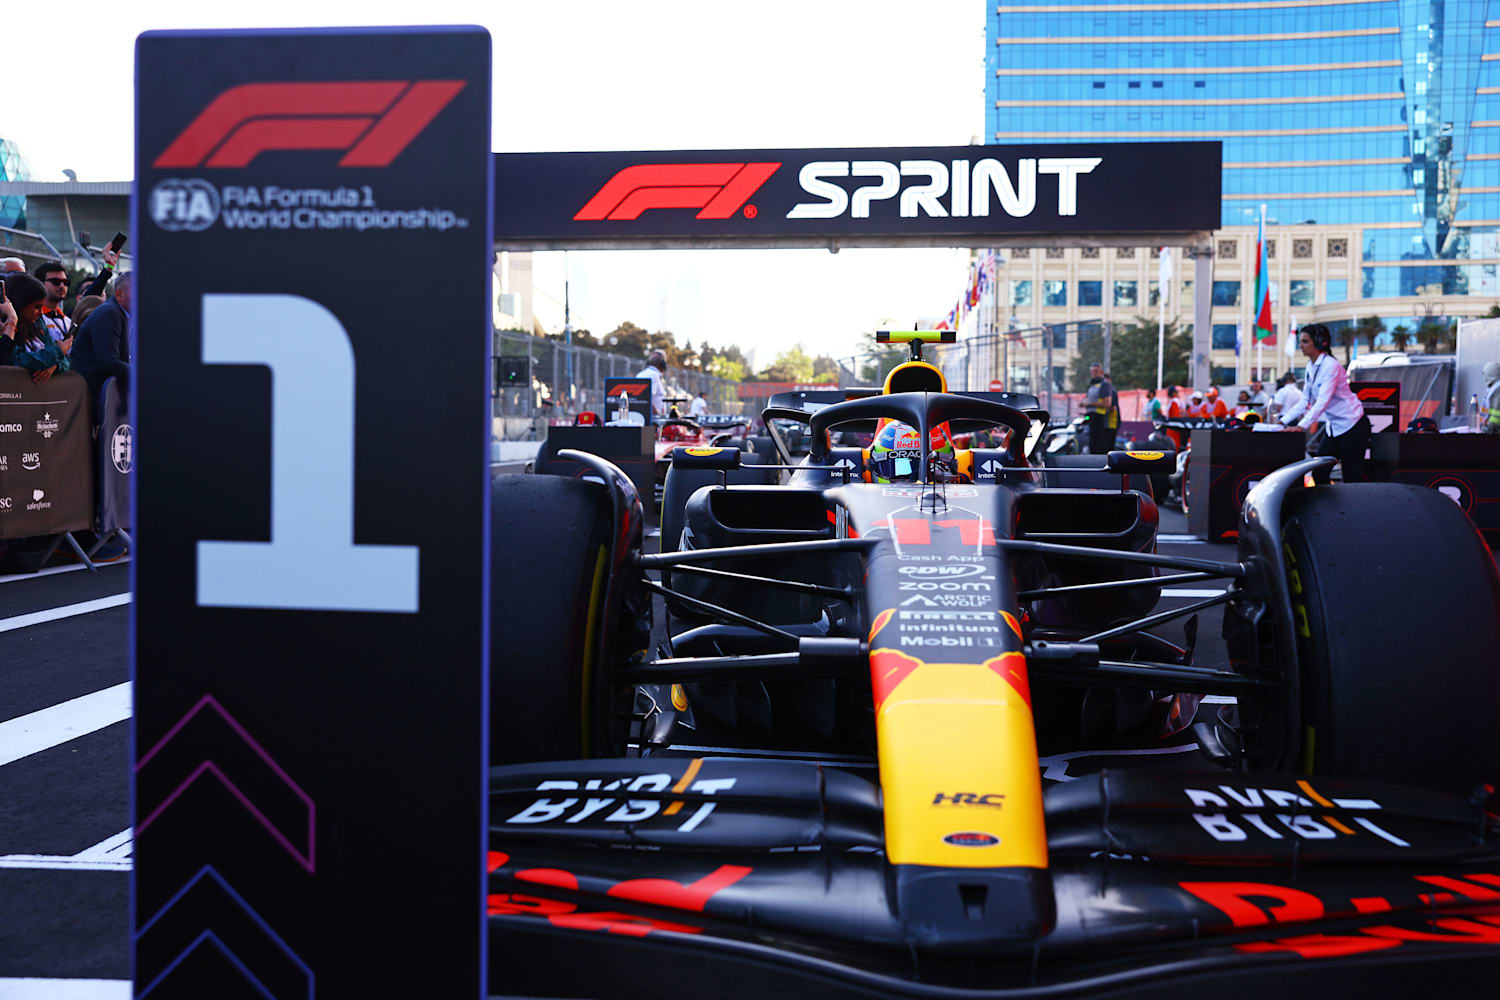 2023 F1 Sprint format Everything you need to know